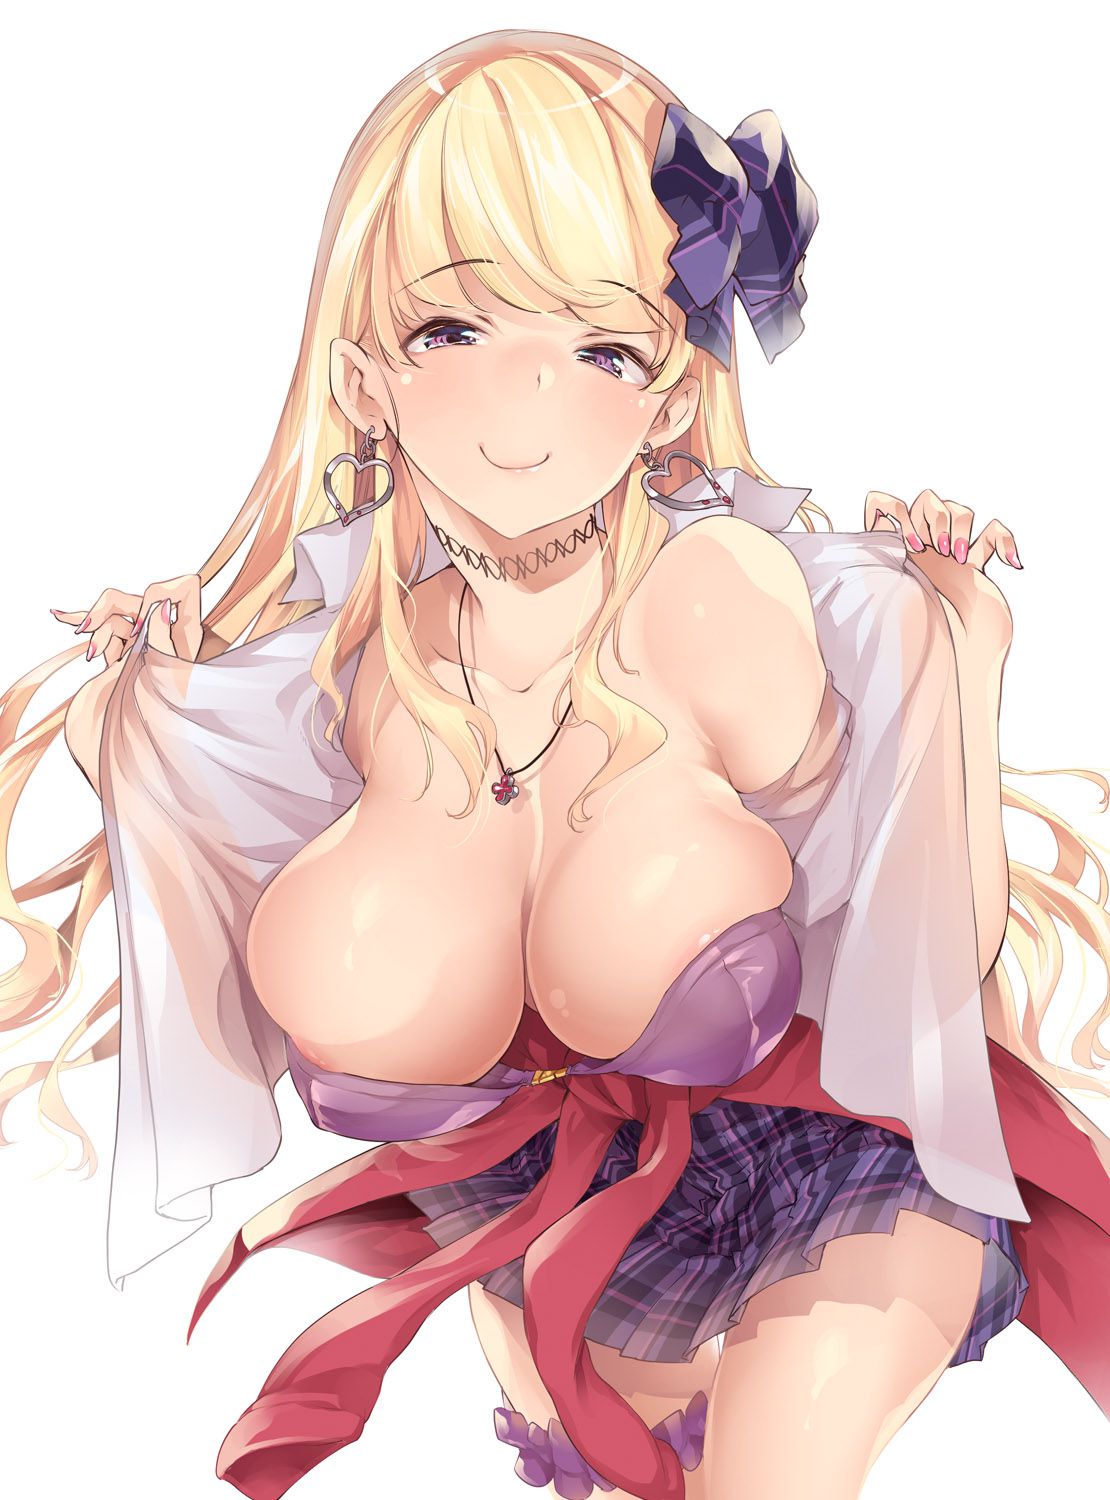 [Erotic anime summary] images collection of beautiful girls who are beautiful women with clothes taking off [50 sheets] 3